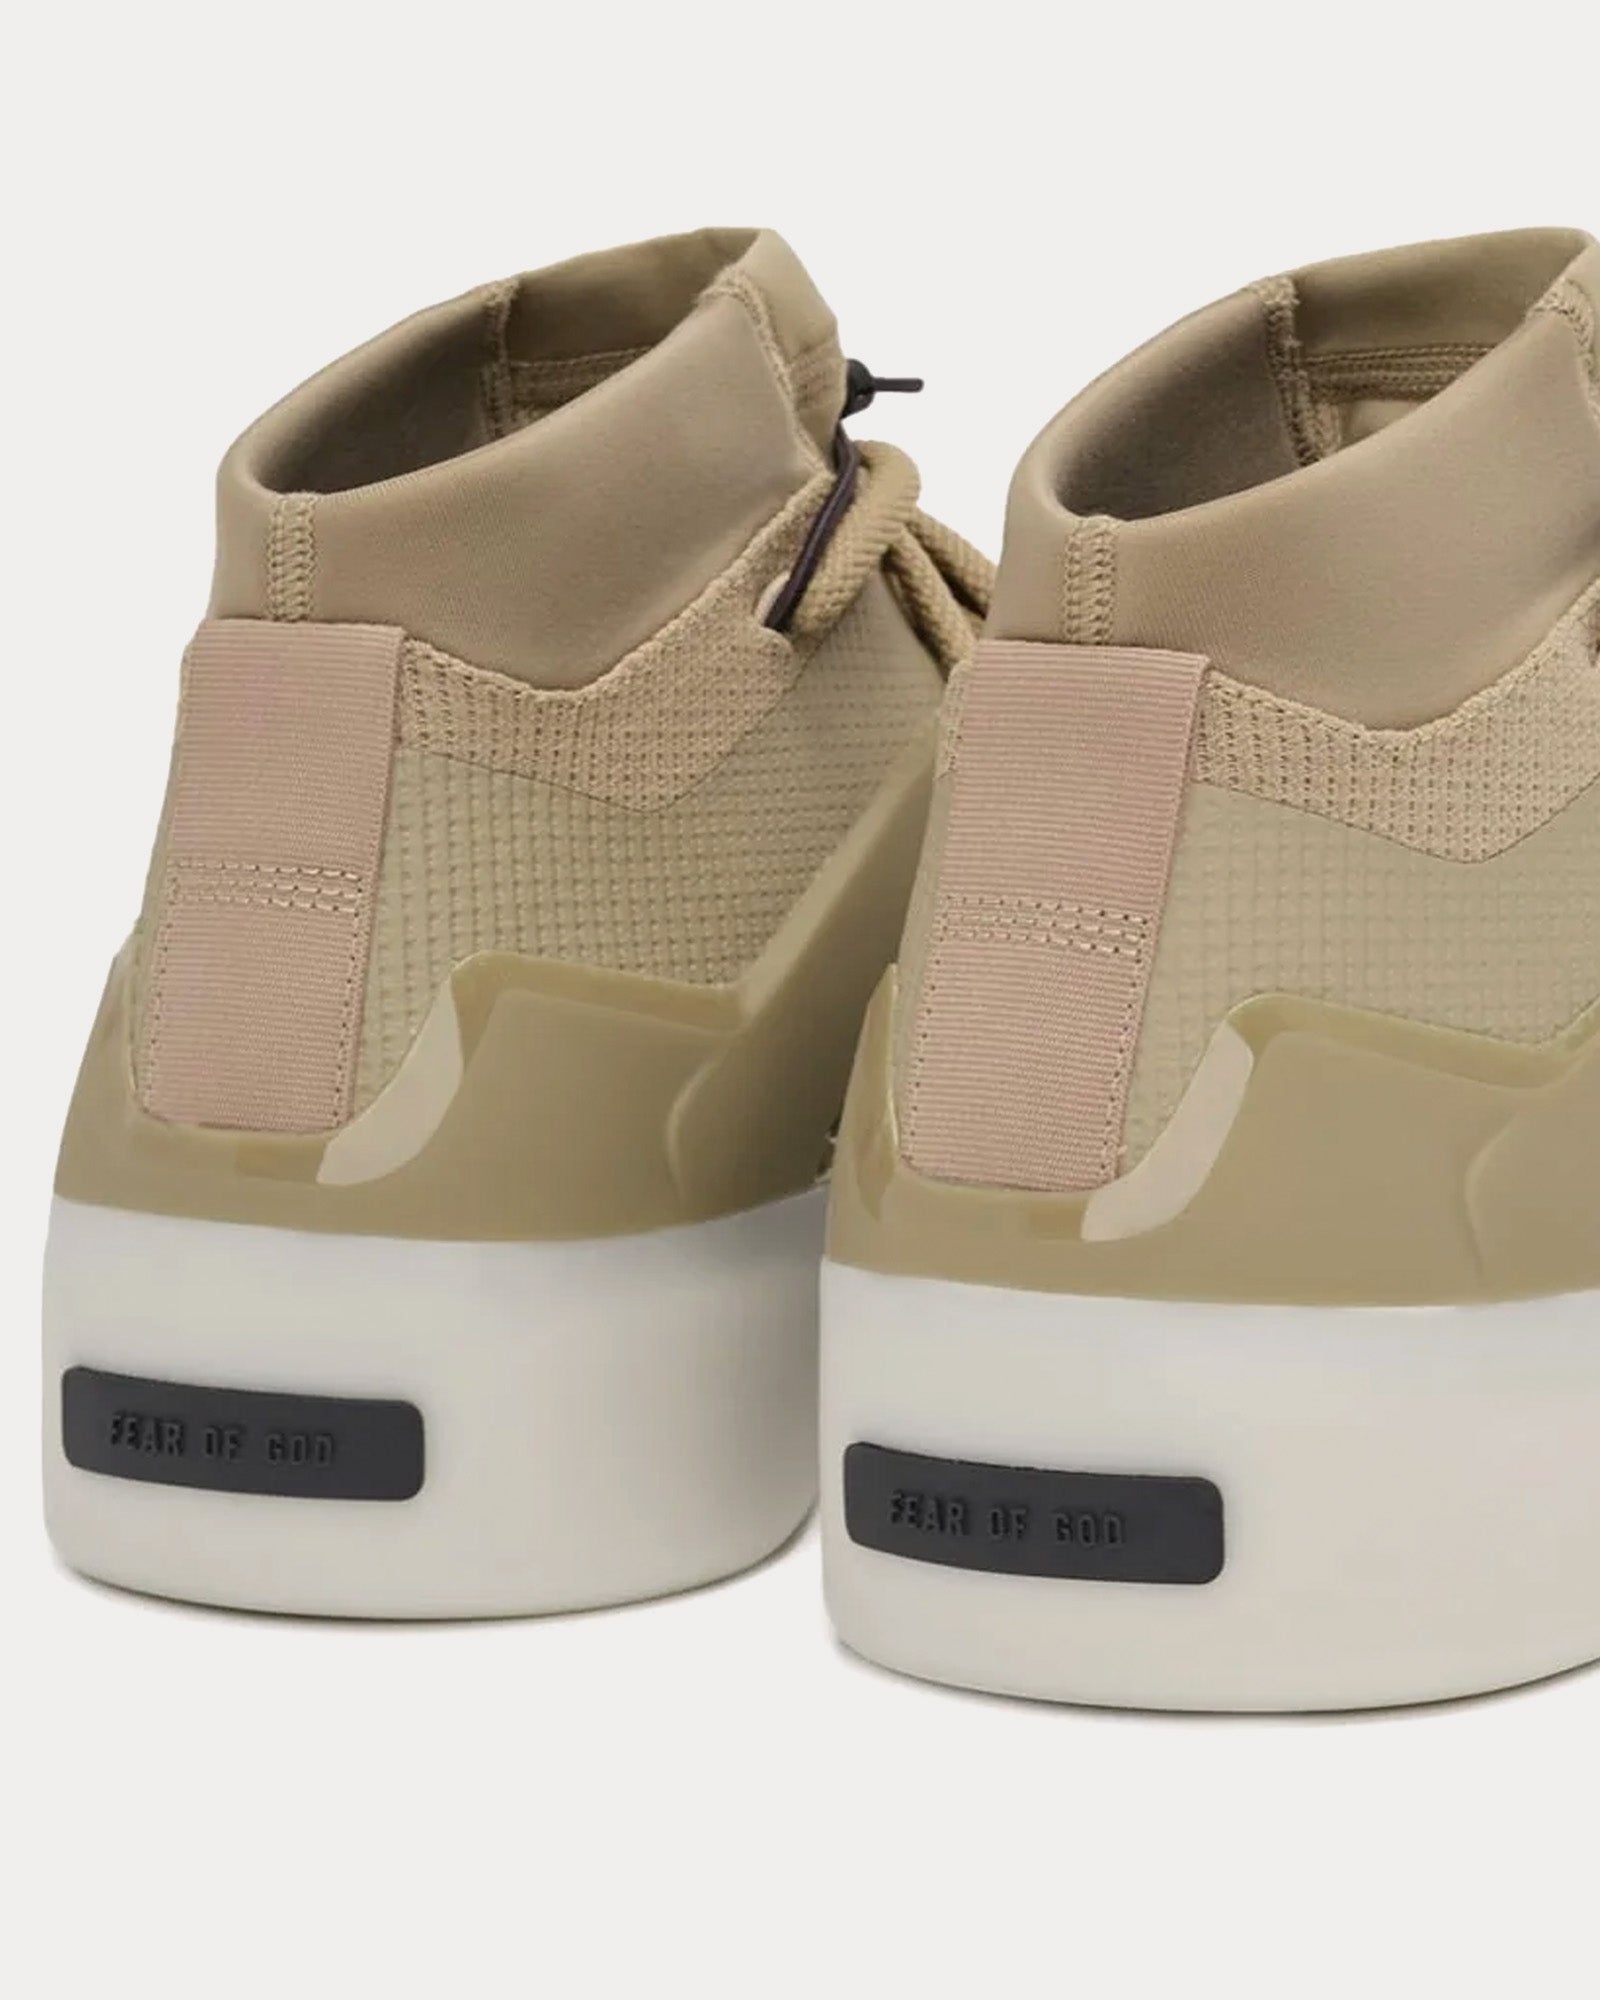 Fear of God Athletics - One Model Clay / Mint High Top Sneakers